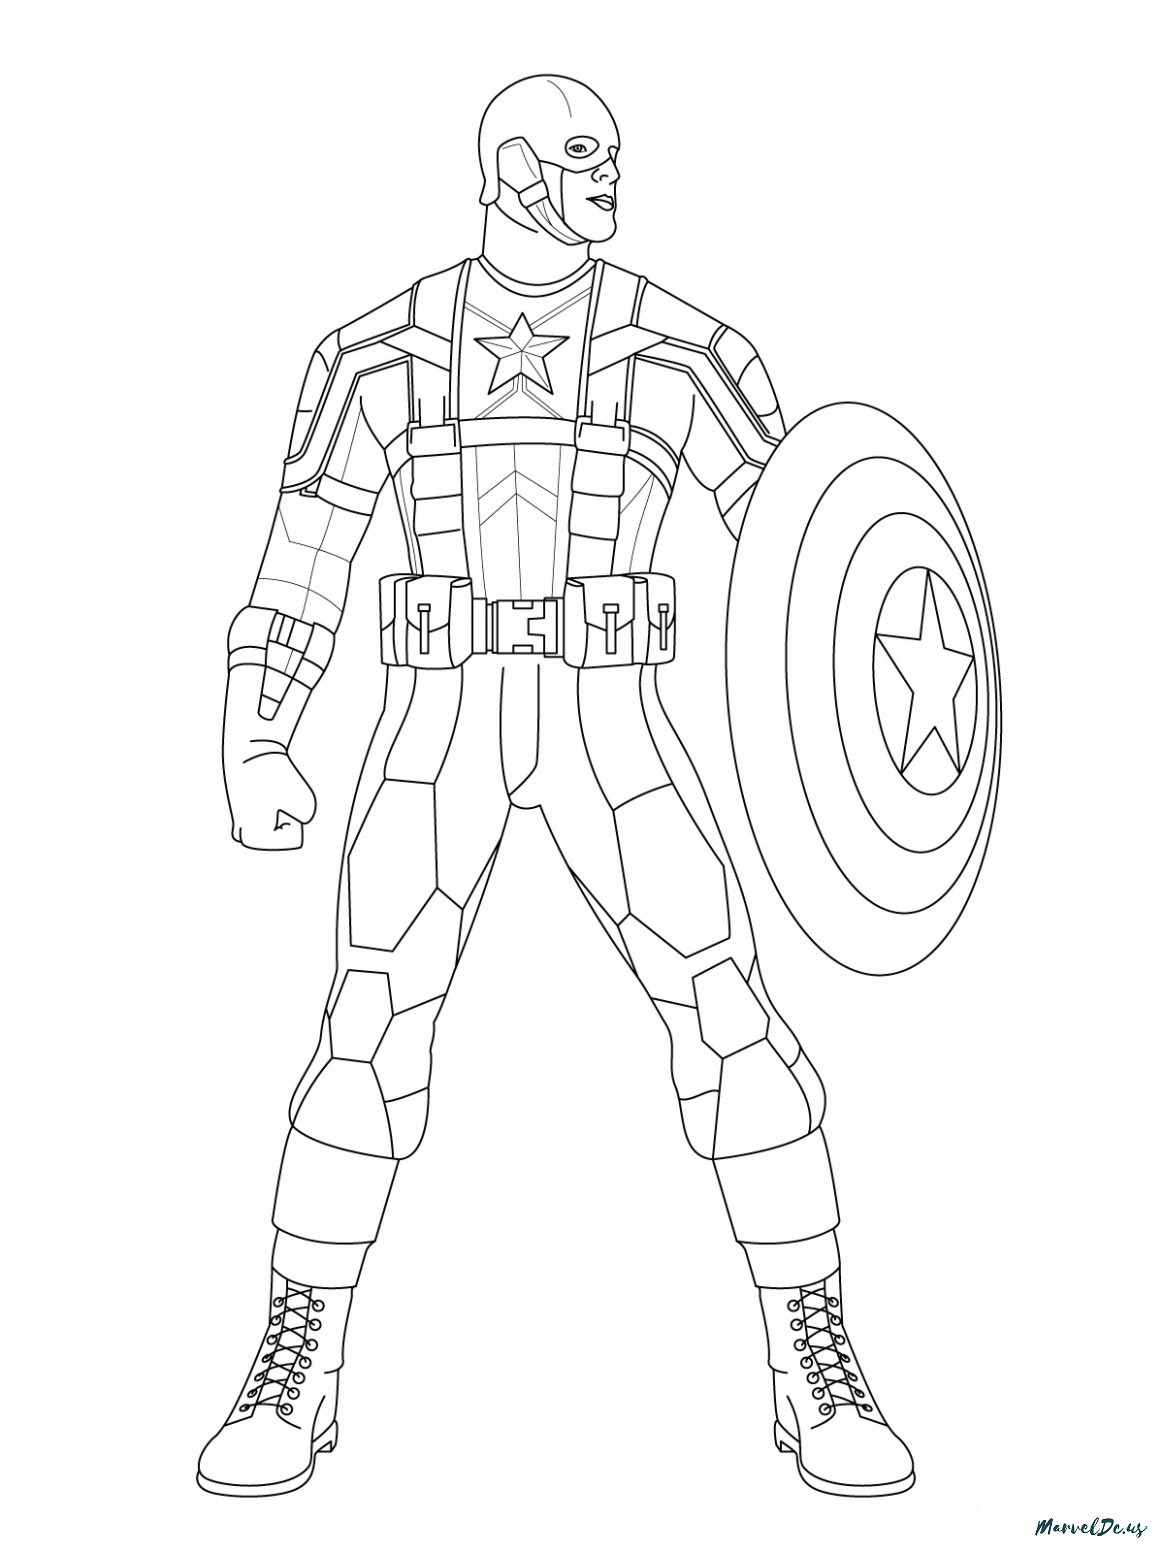 Avengers Infinity War Captain America Coloring Pages | Total Update